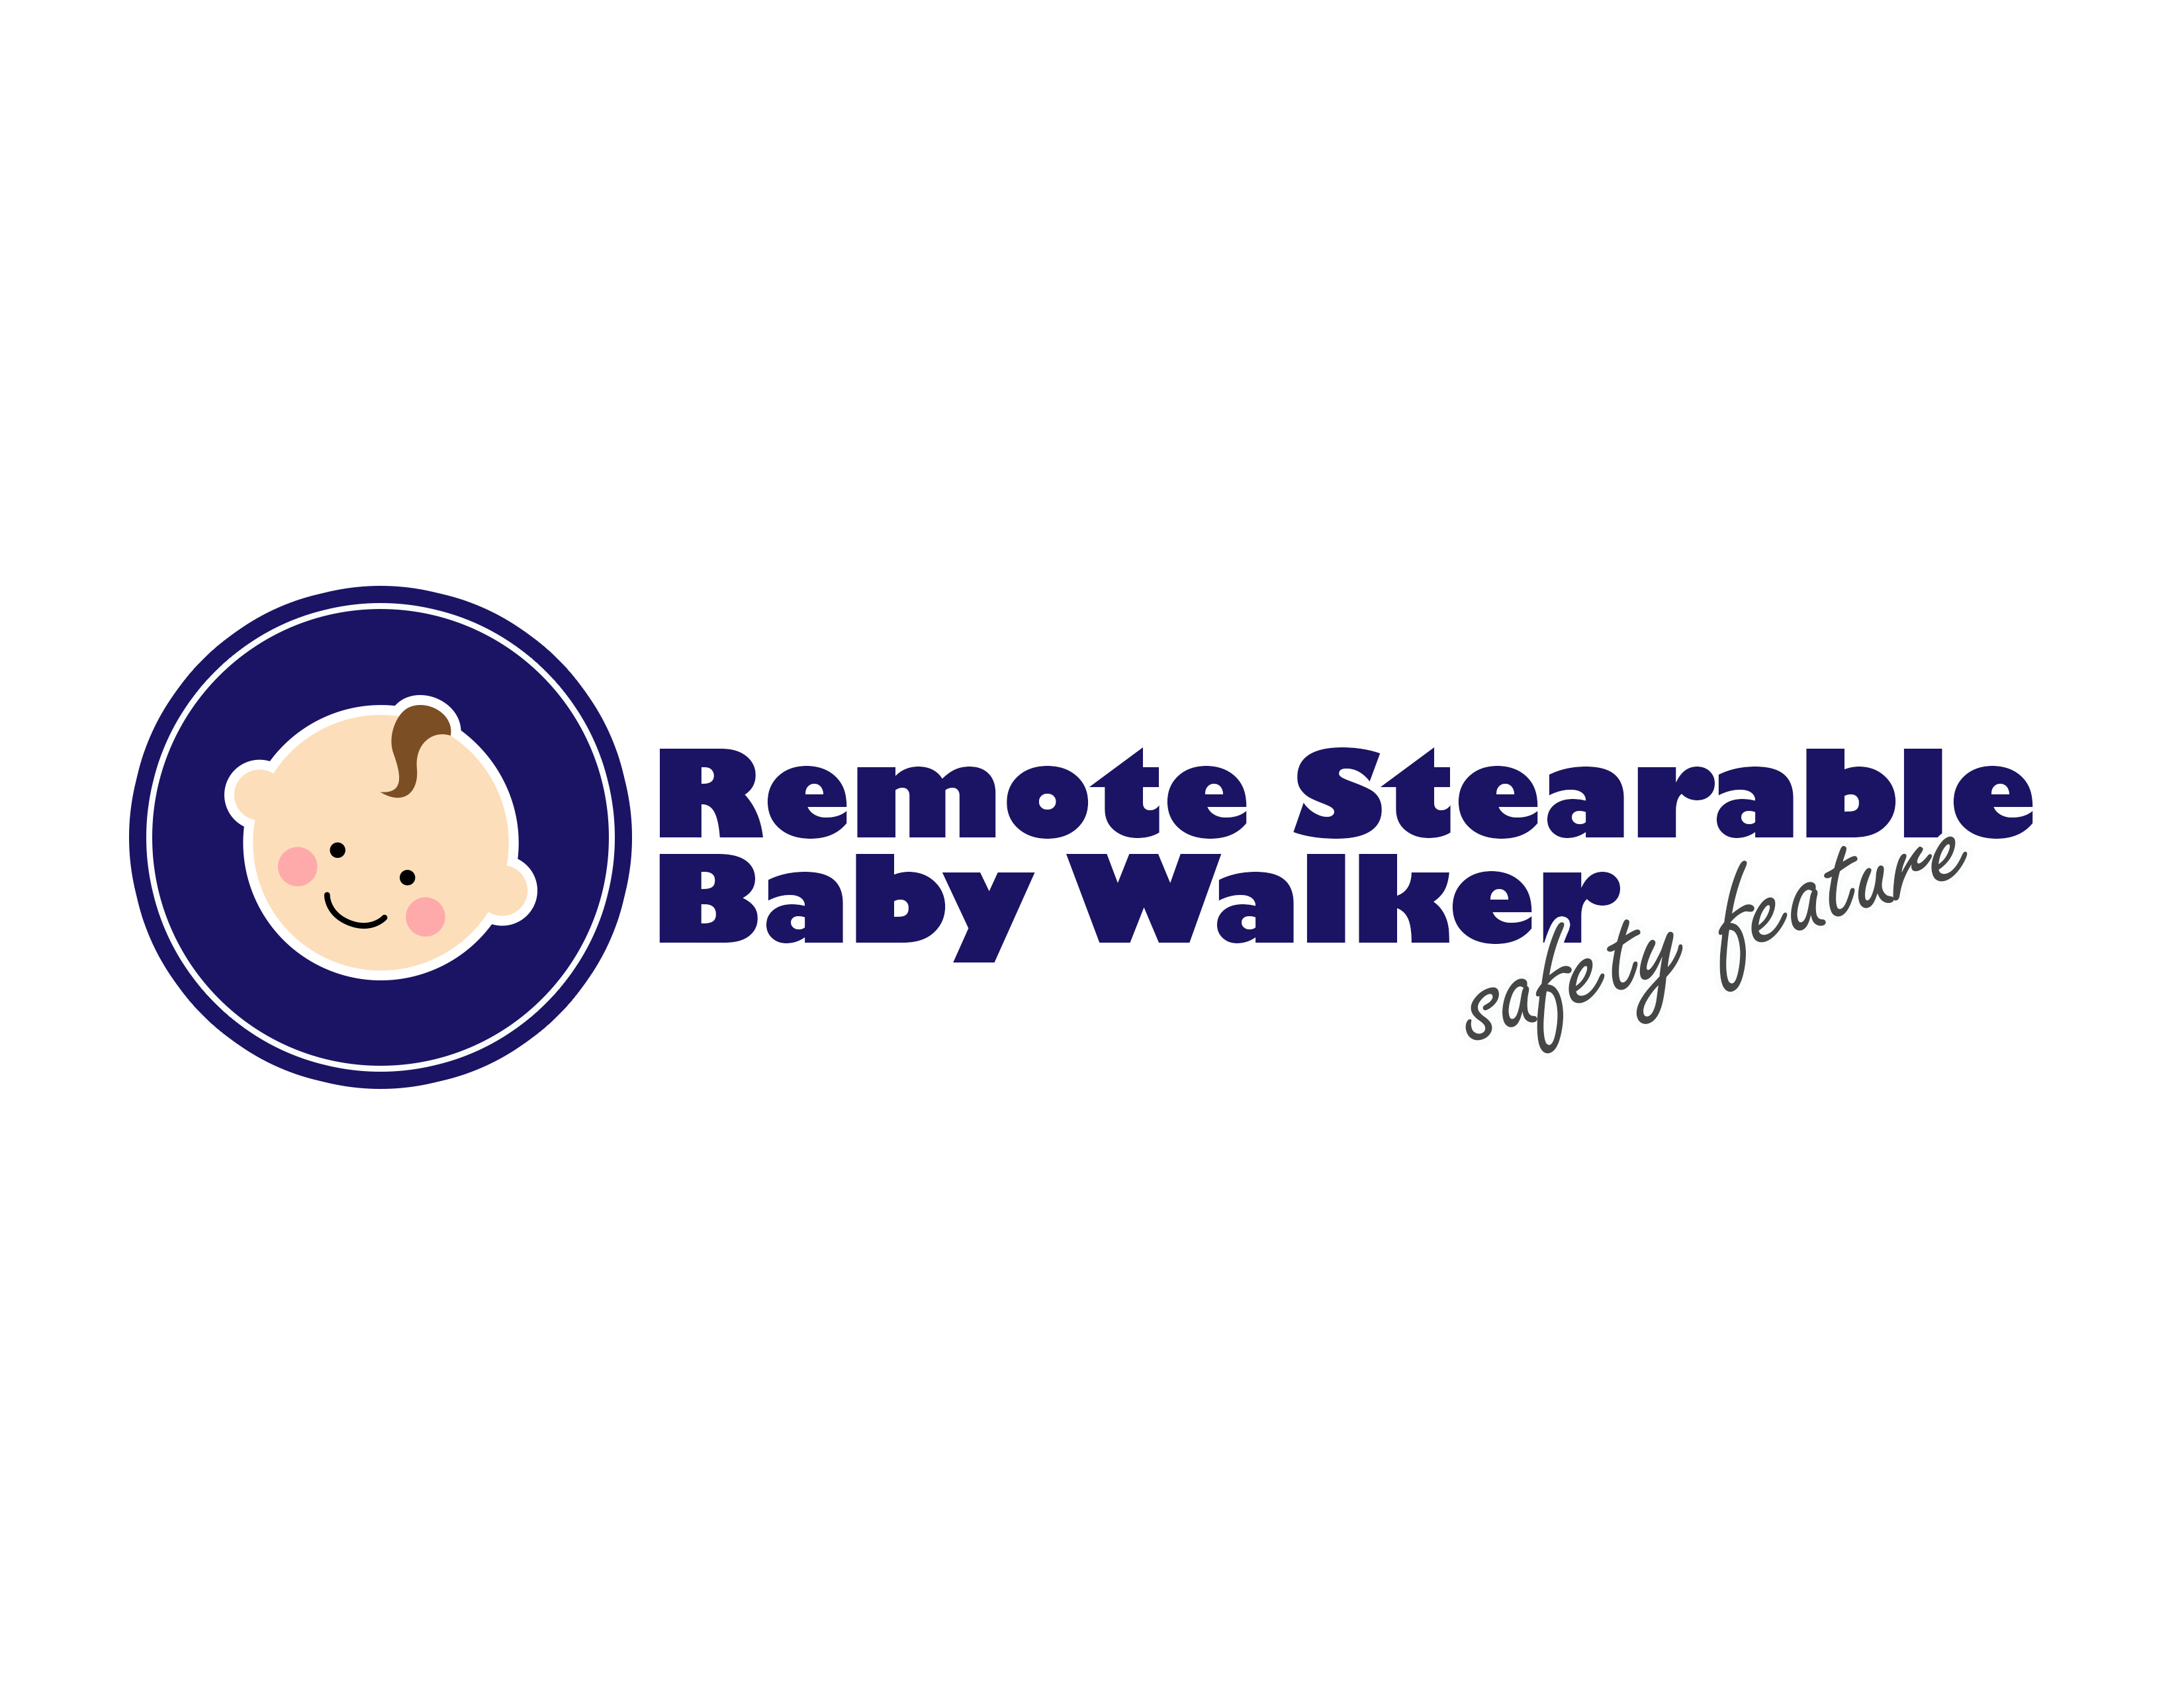 The Remote Controlled Safety Baby Walker will help parents fulfill their responsibilities while also keeping an eye on their kids.